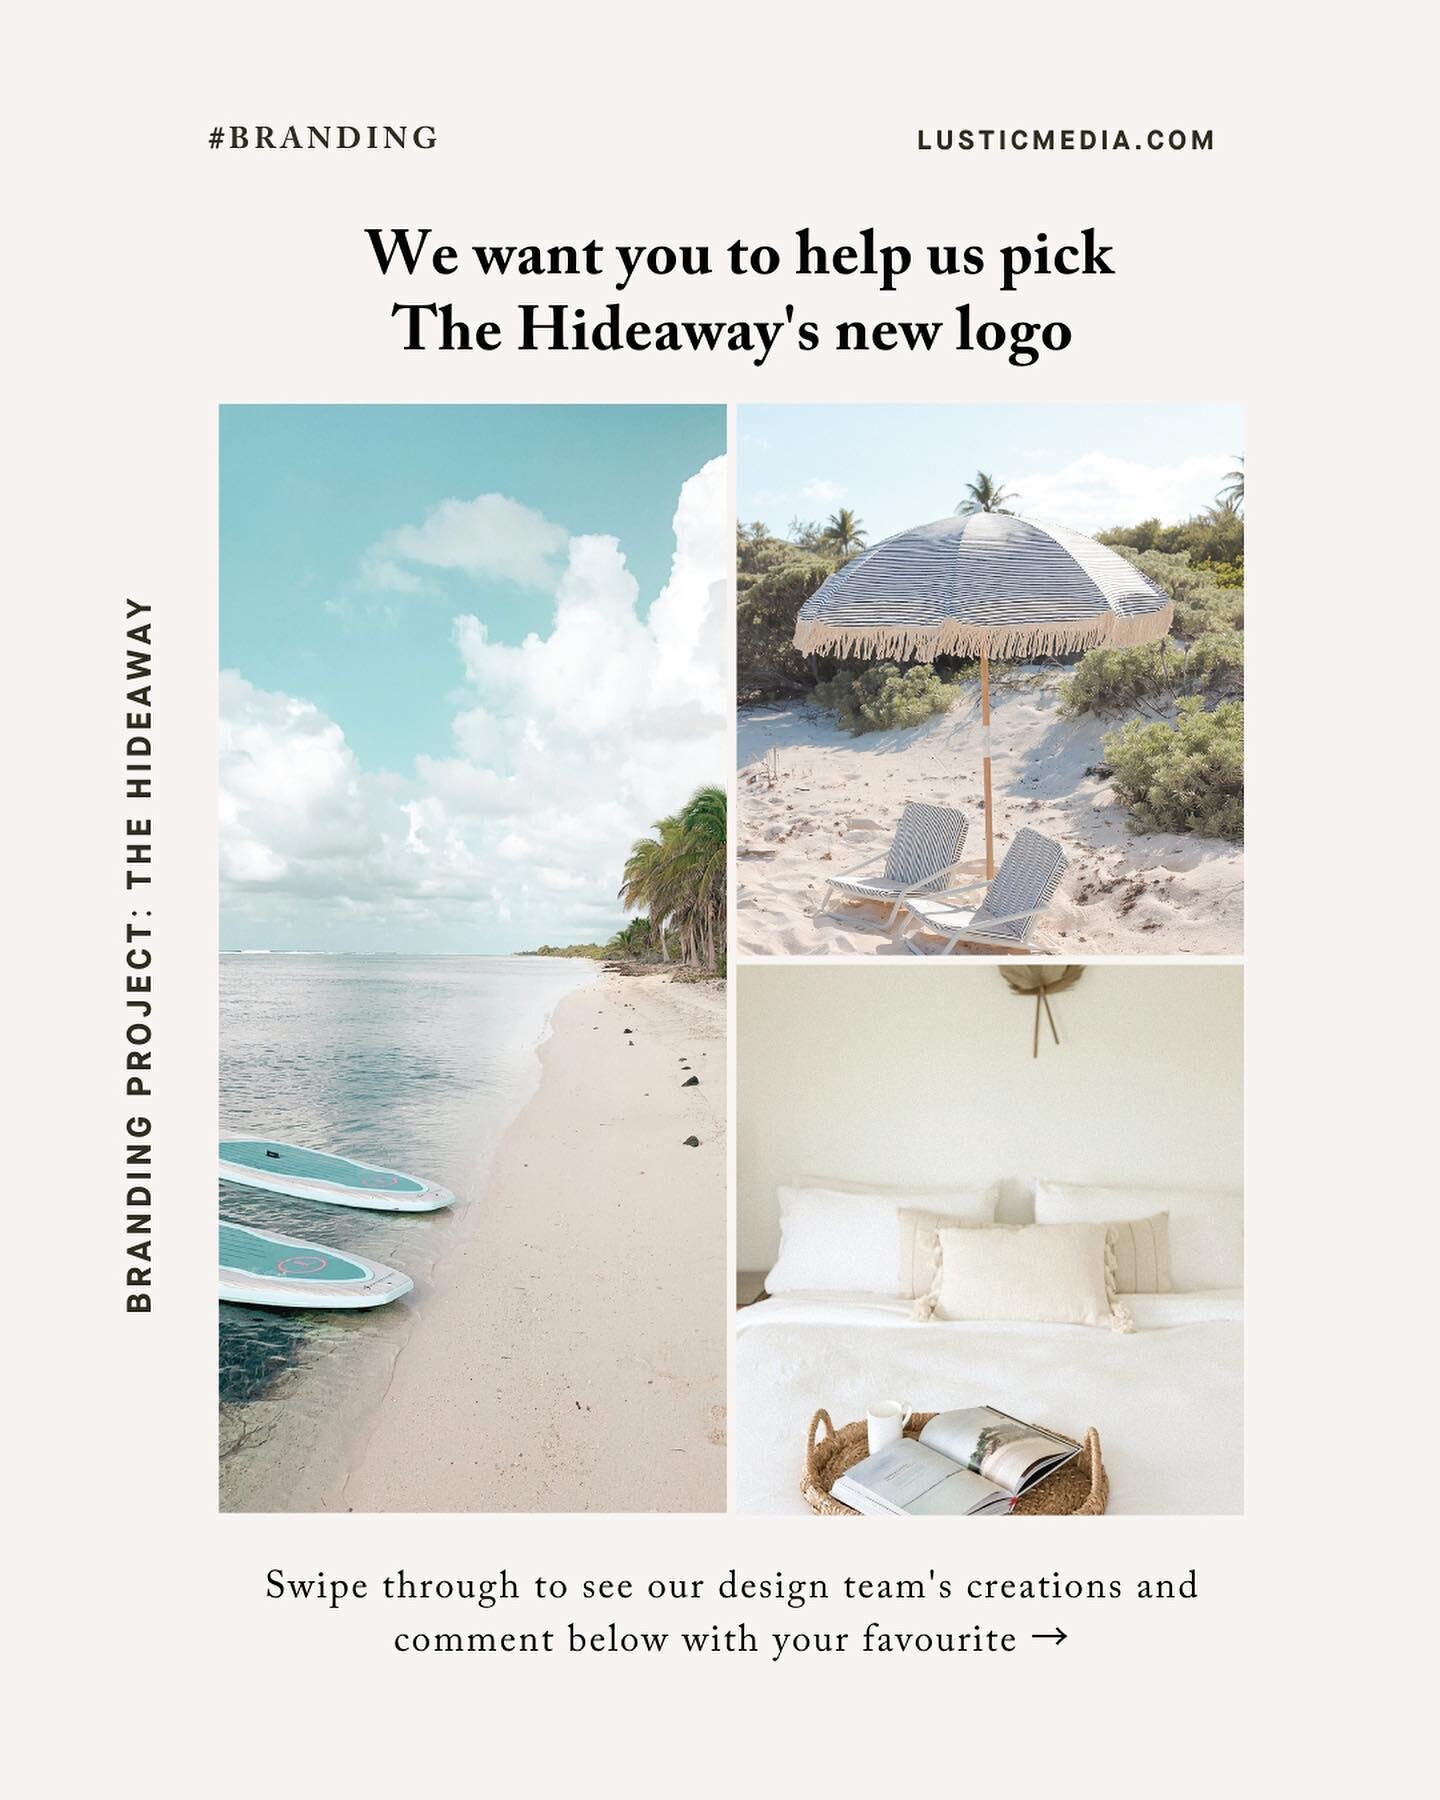 At @lusticmedia one of our summer branding projects includes a very special beach house that some of you may know&hellip;👀

We thought it would be fun to get your help to pick the new logo for @thehideaway.ky so please cast your vote in the comments